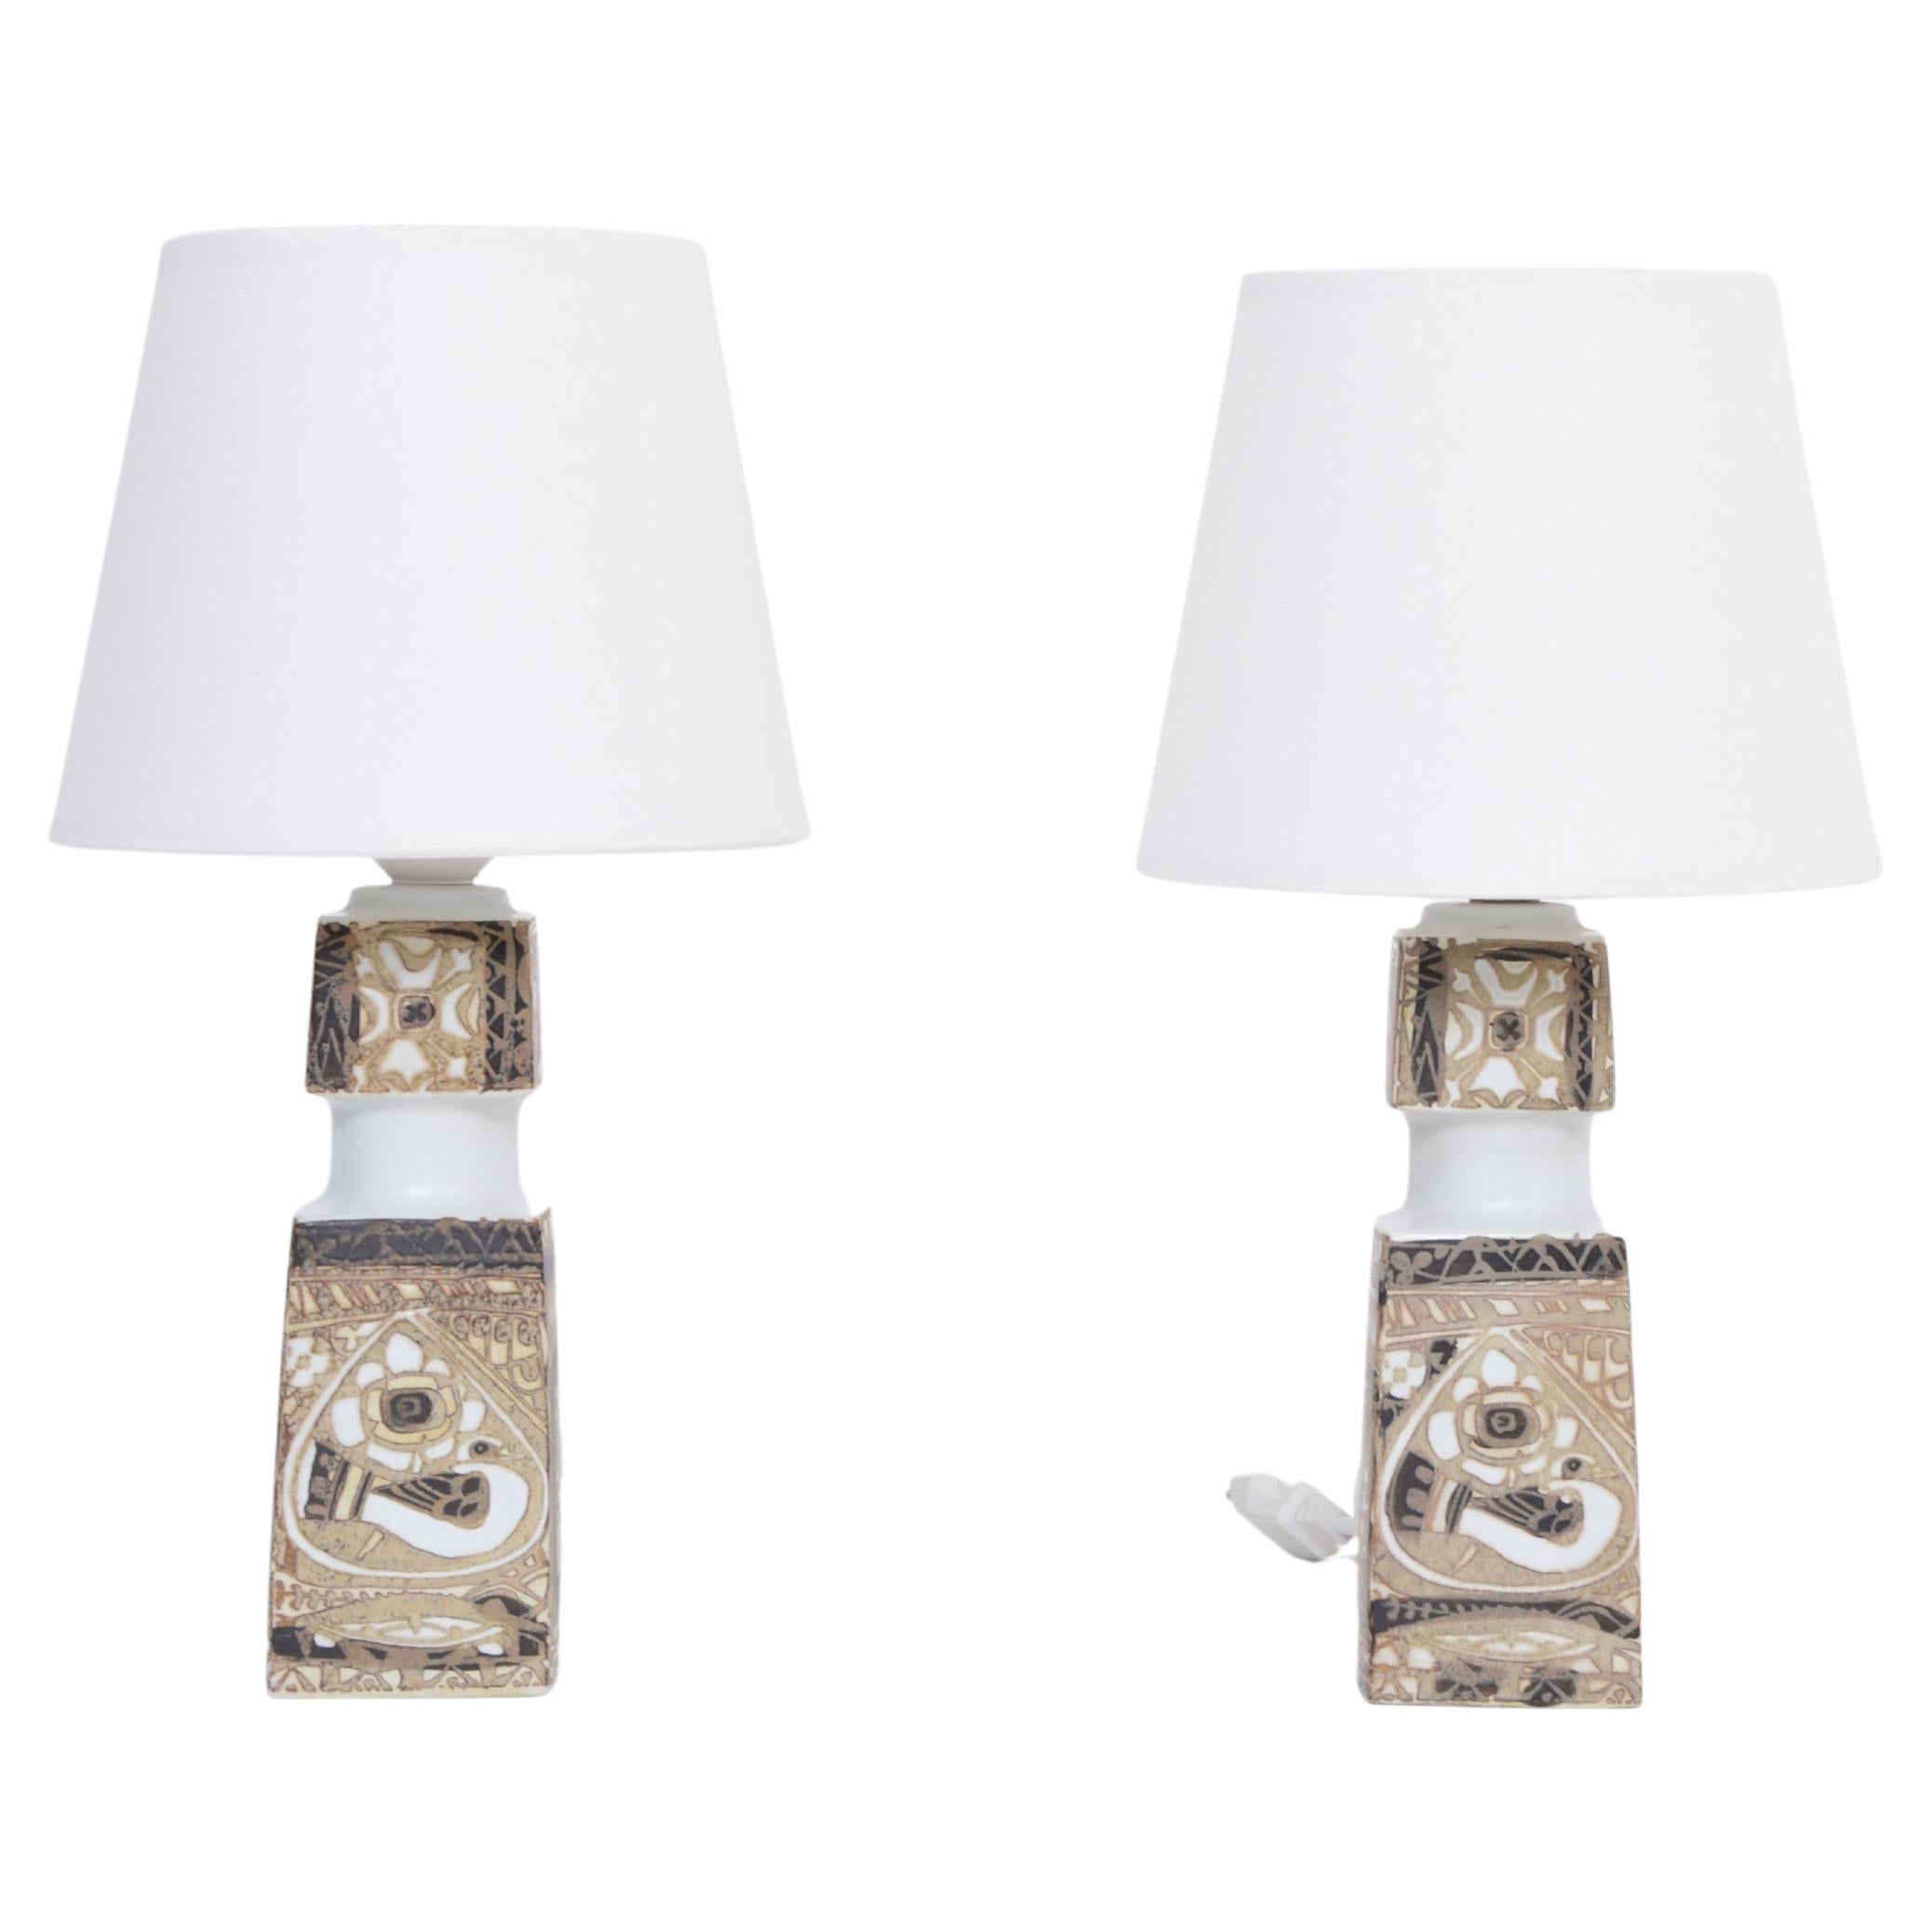 Pair of Danish Mid-Century Modern Table Lamps by Nils Thorsson for Fog & Morup